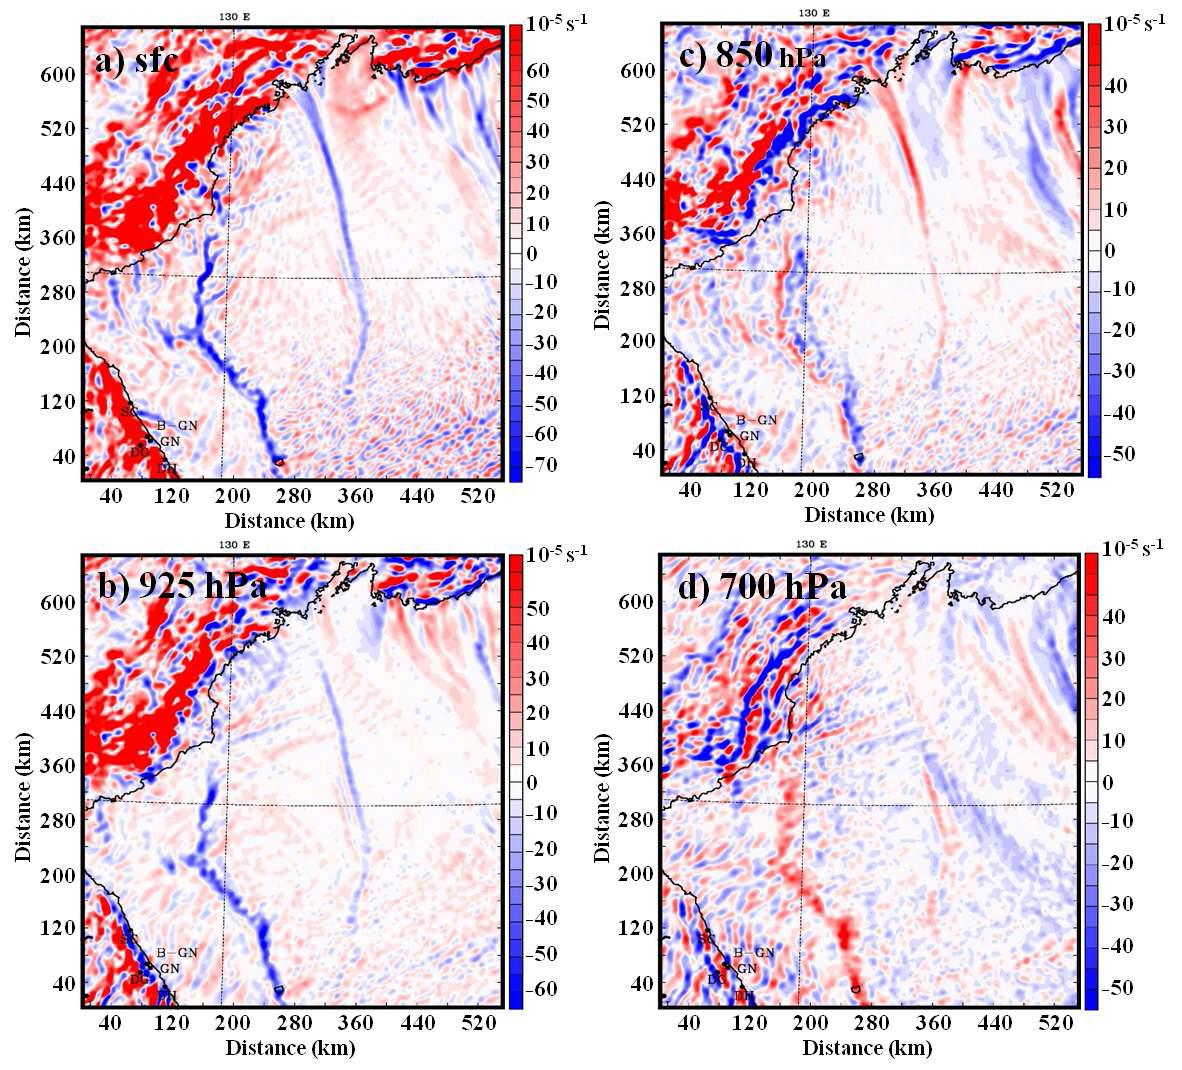 The simulated divergence fields (Domain 4) at the (a) surface, and at the level of (b) 925 hPa, (C) 850 hPa, and (d) 700 hPa valid at 1300 KST 1 February 2012. Divergence and convergence are represented with color shading based on scale at right of the figures, respectively.